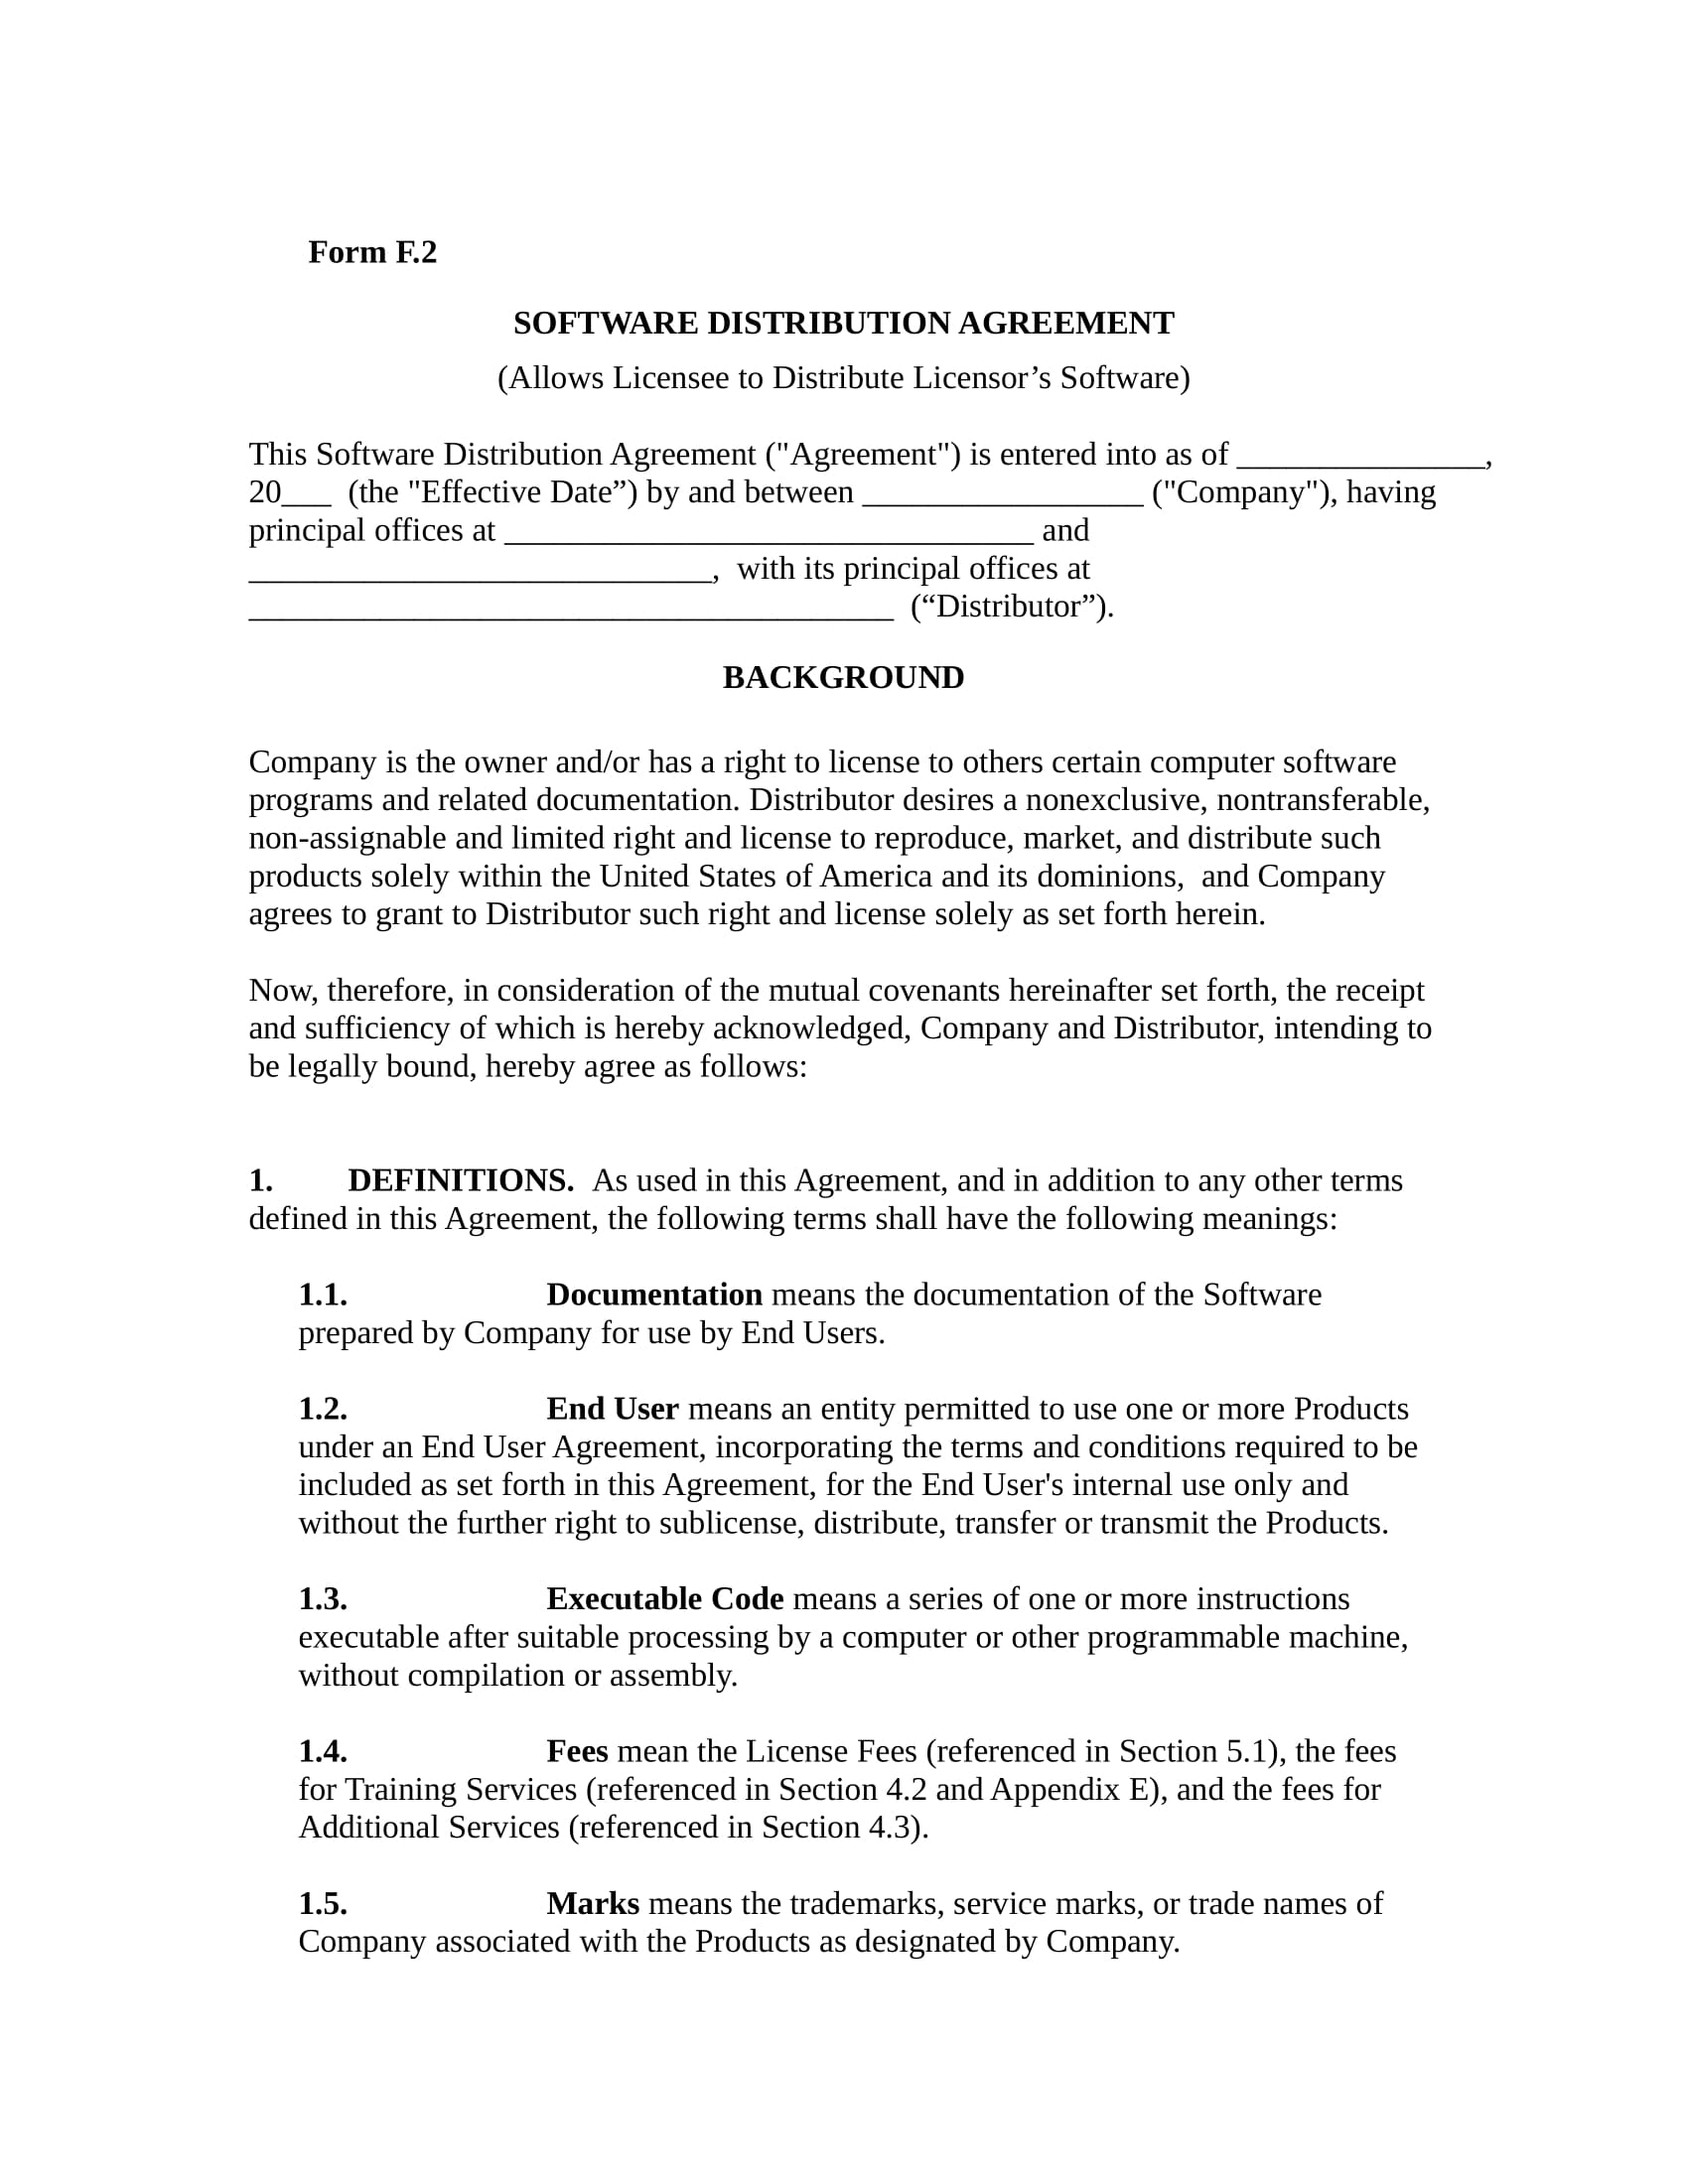 software distribution agreement contract form 01